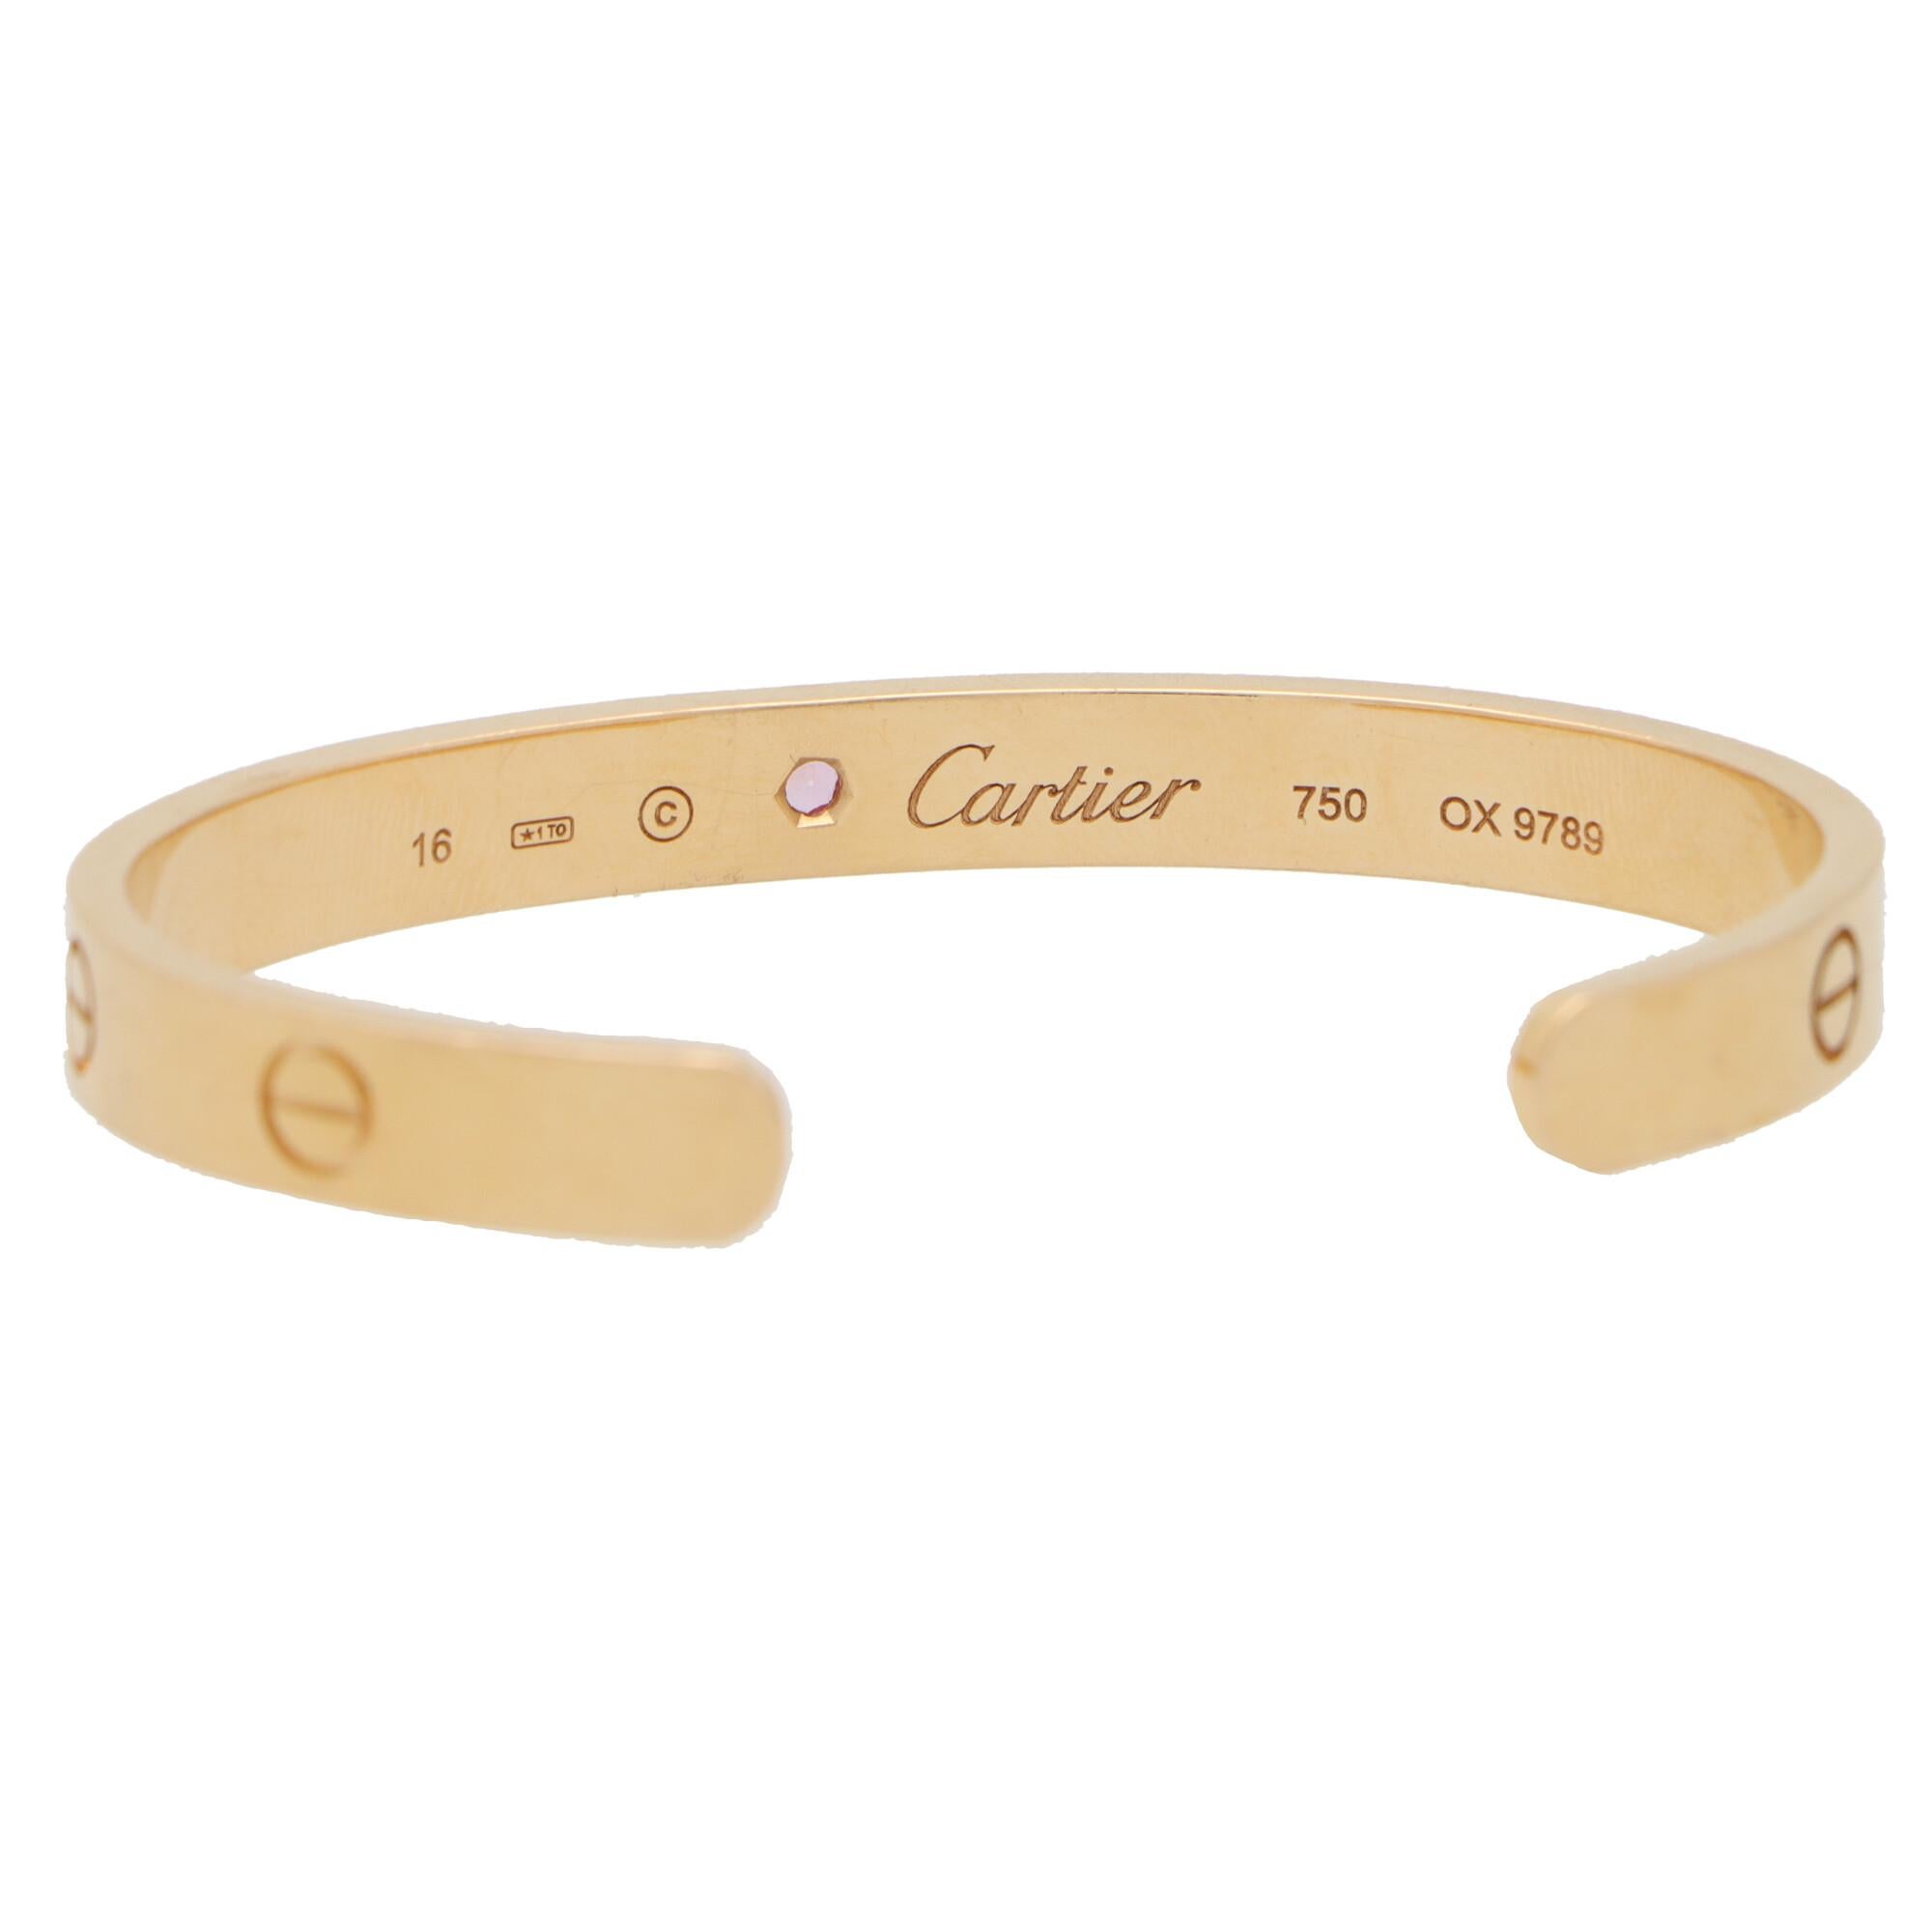 A classic Cartier Love U torque bangle set in 18k rose gold.

The Love collection is a firm favourite of many mainly due to the simple, beautiful and elegant design. The bangle is composed of a 6-millimetre band with eight individual nail motifs